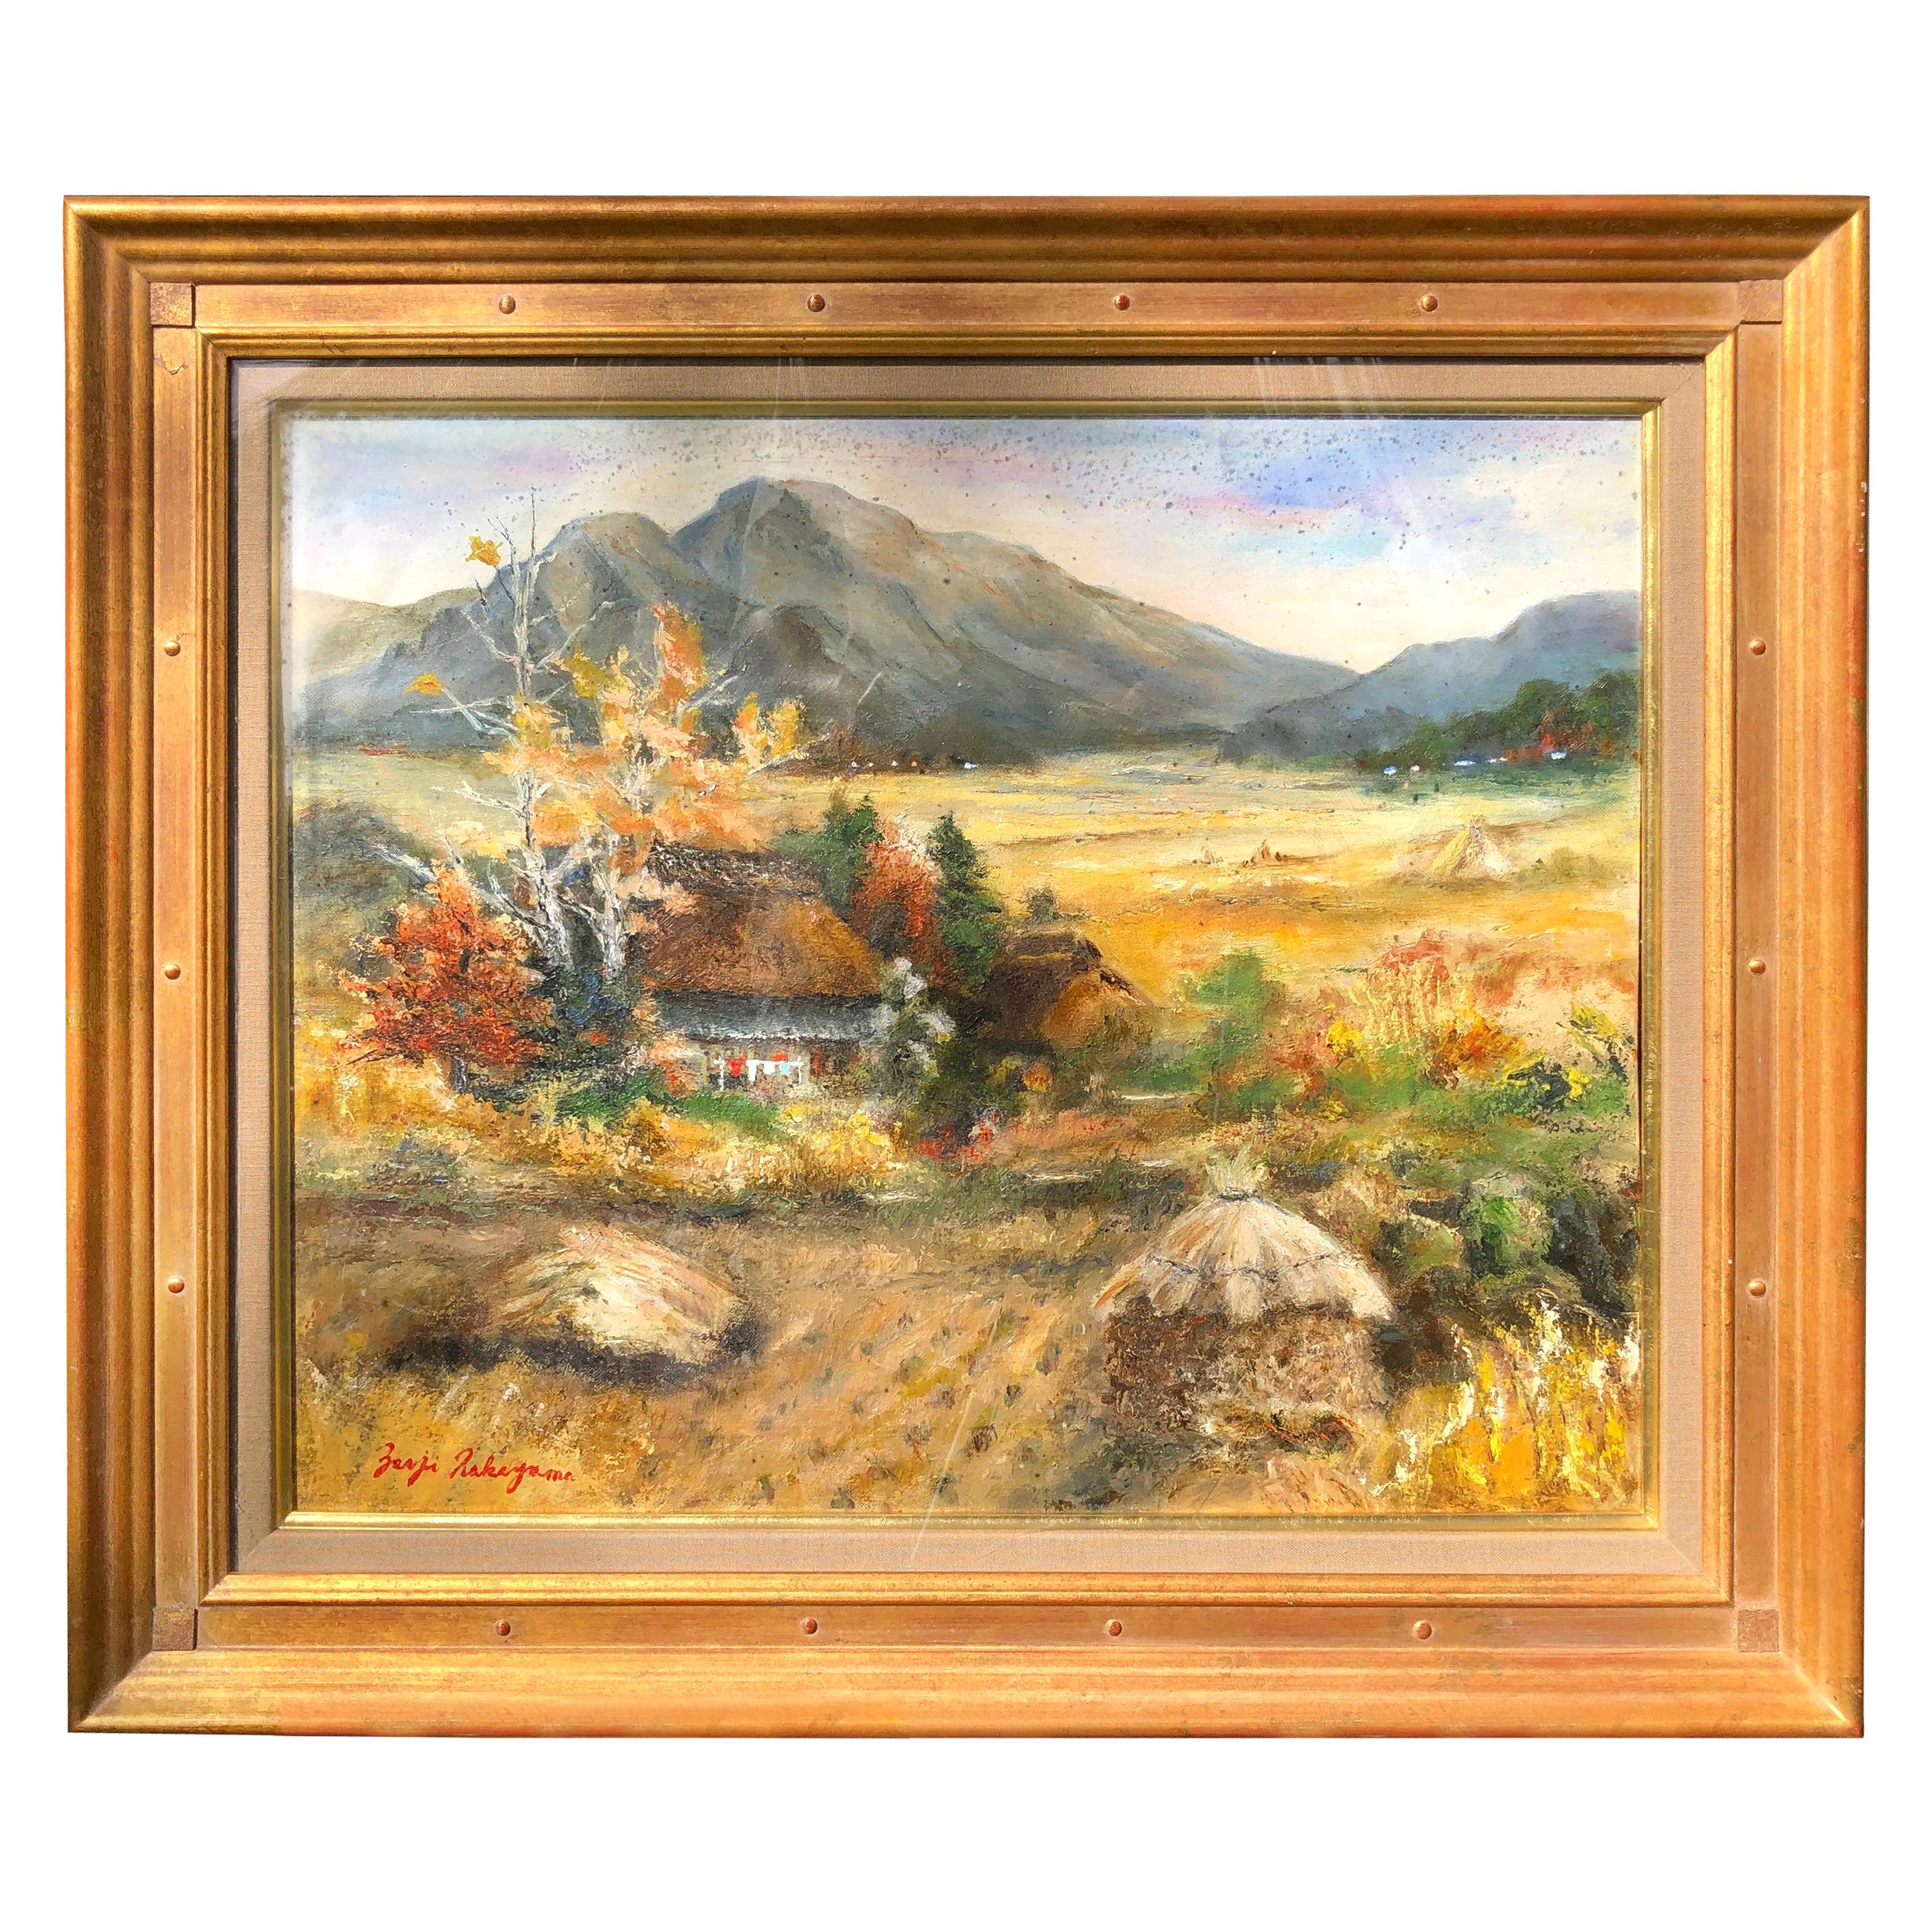 Japan Vintage "Mountain Cottages" Oil Painting By Nakayama